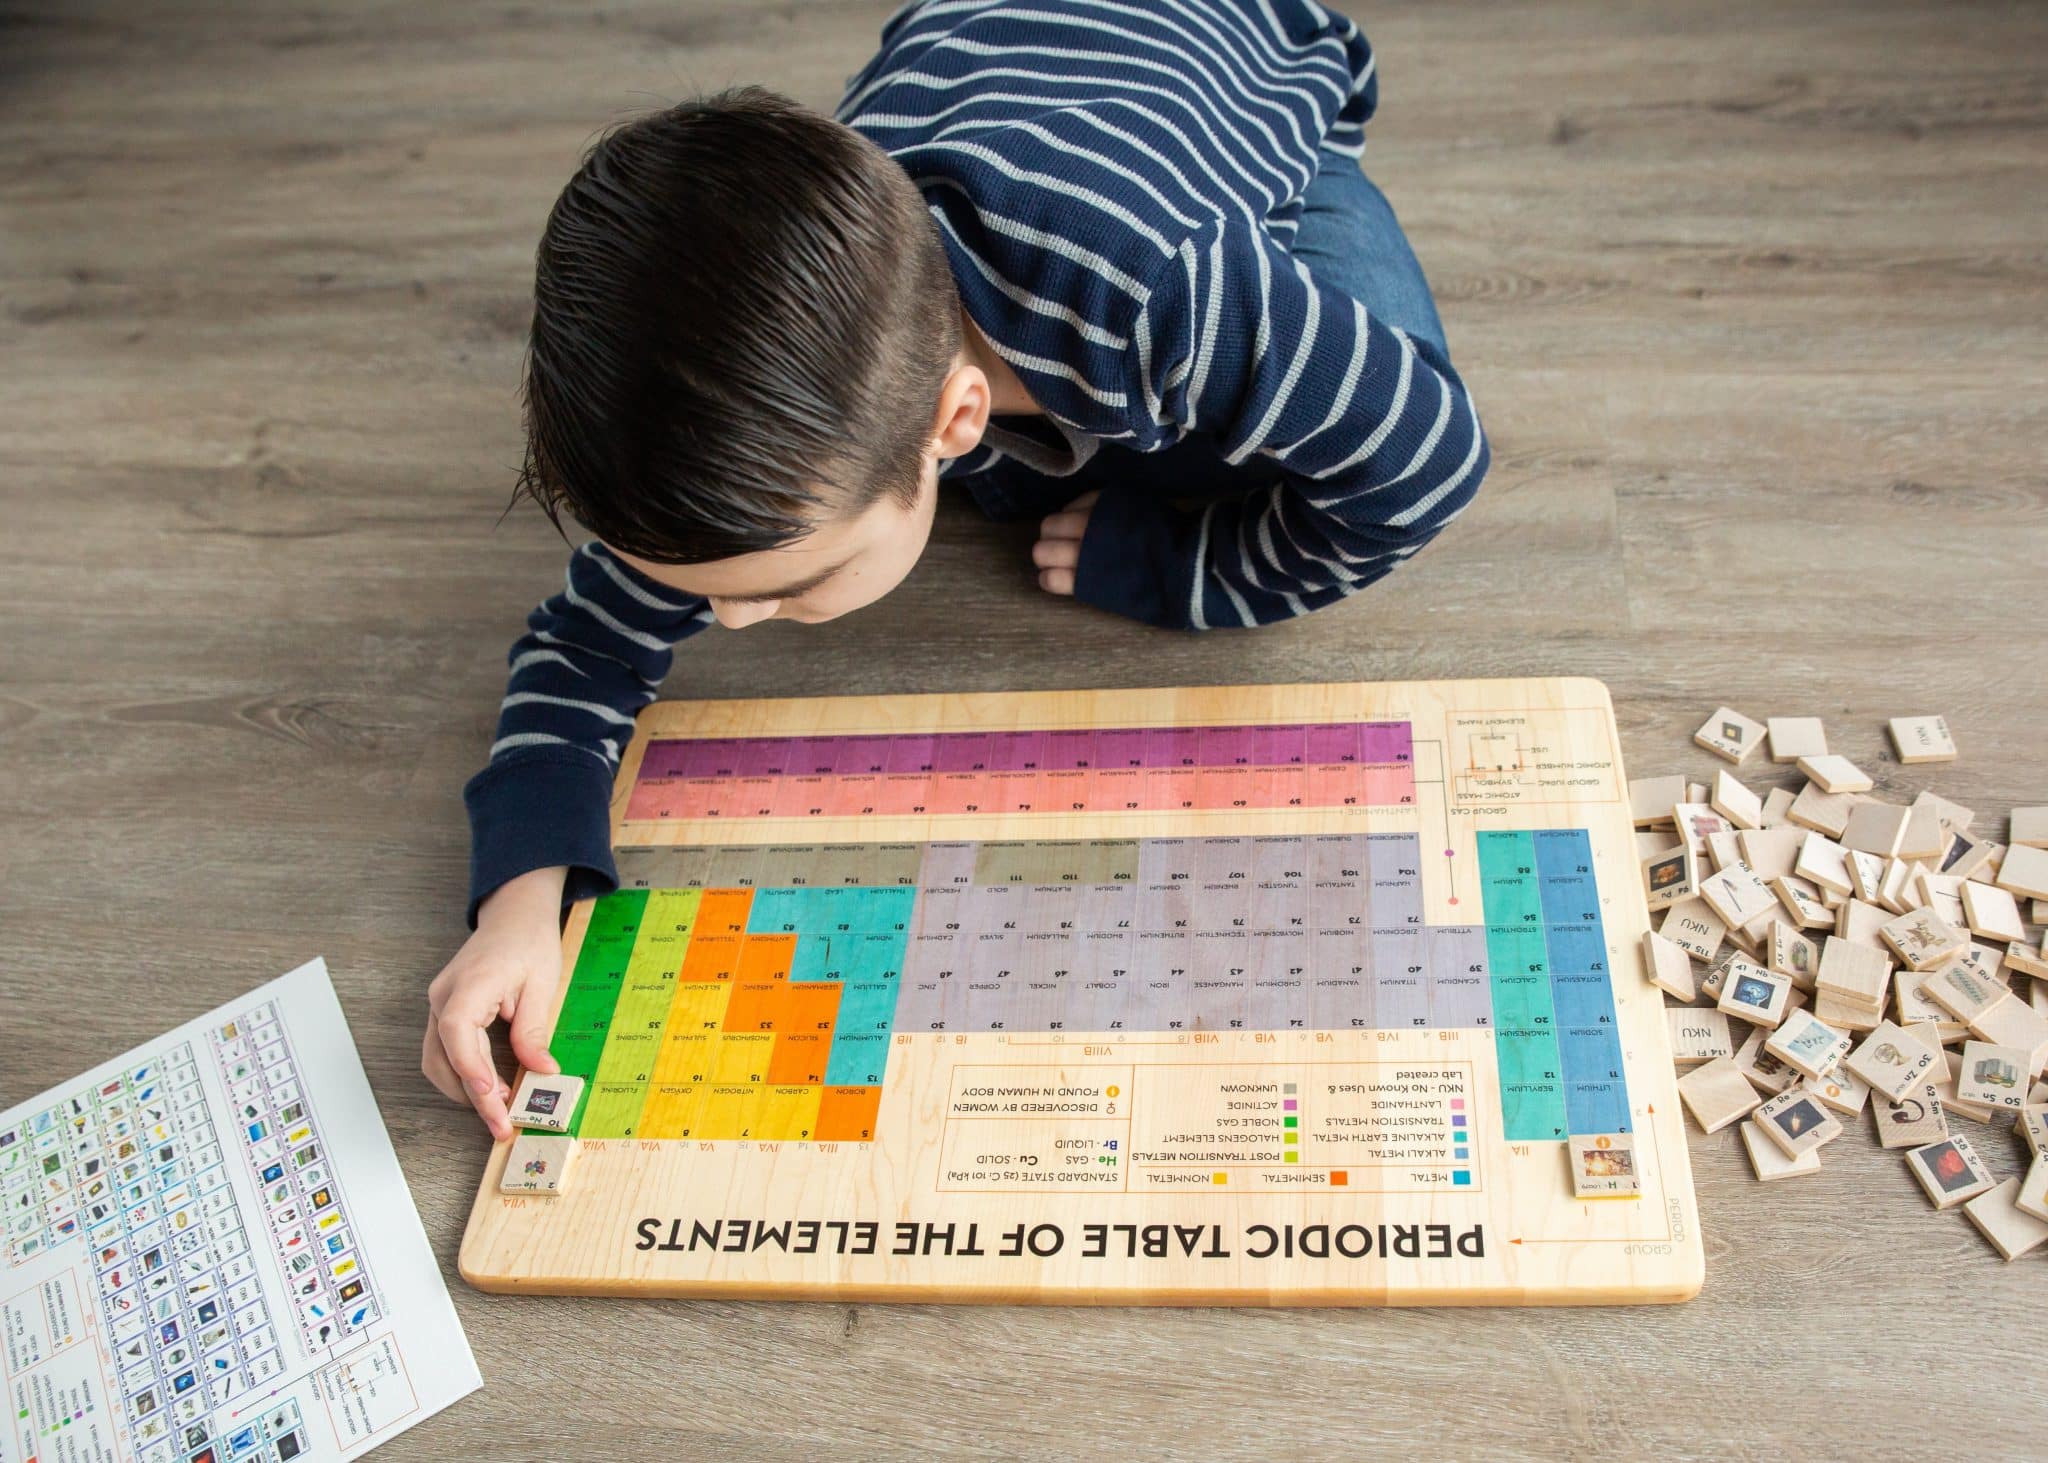 A young boy engrossed in a board game, enjoying his time while playing